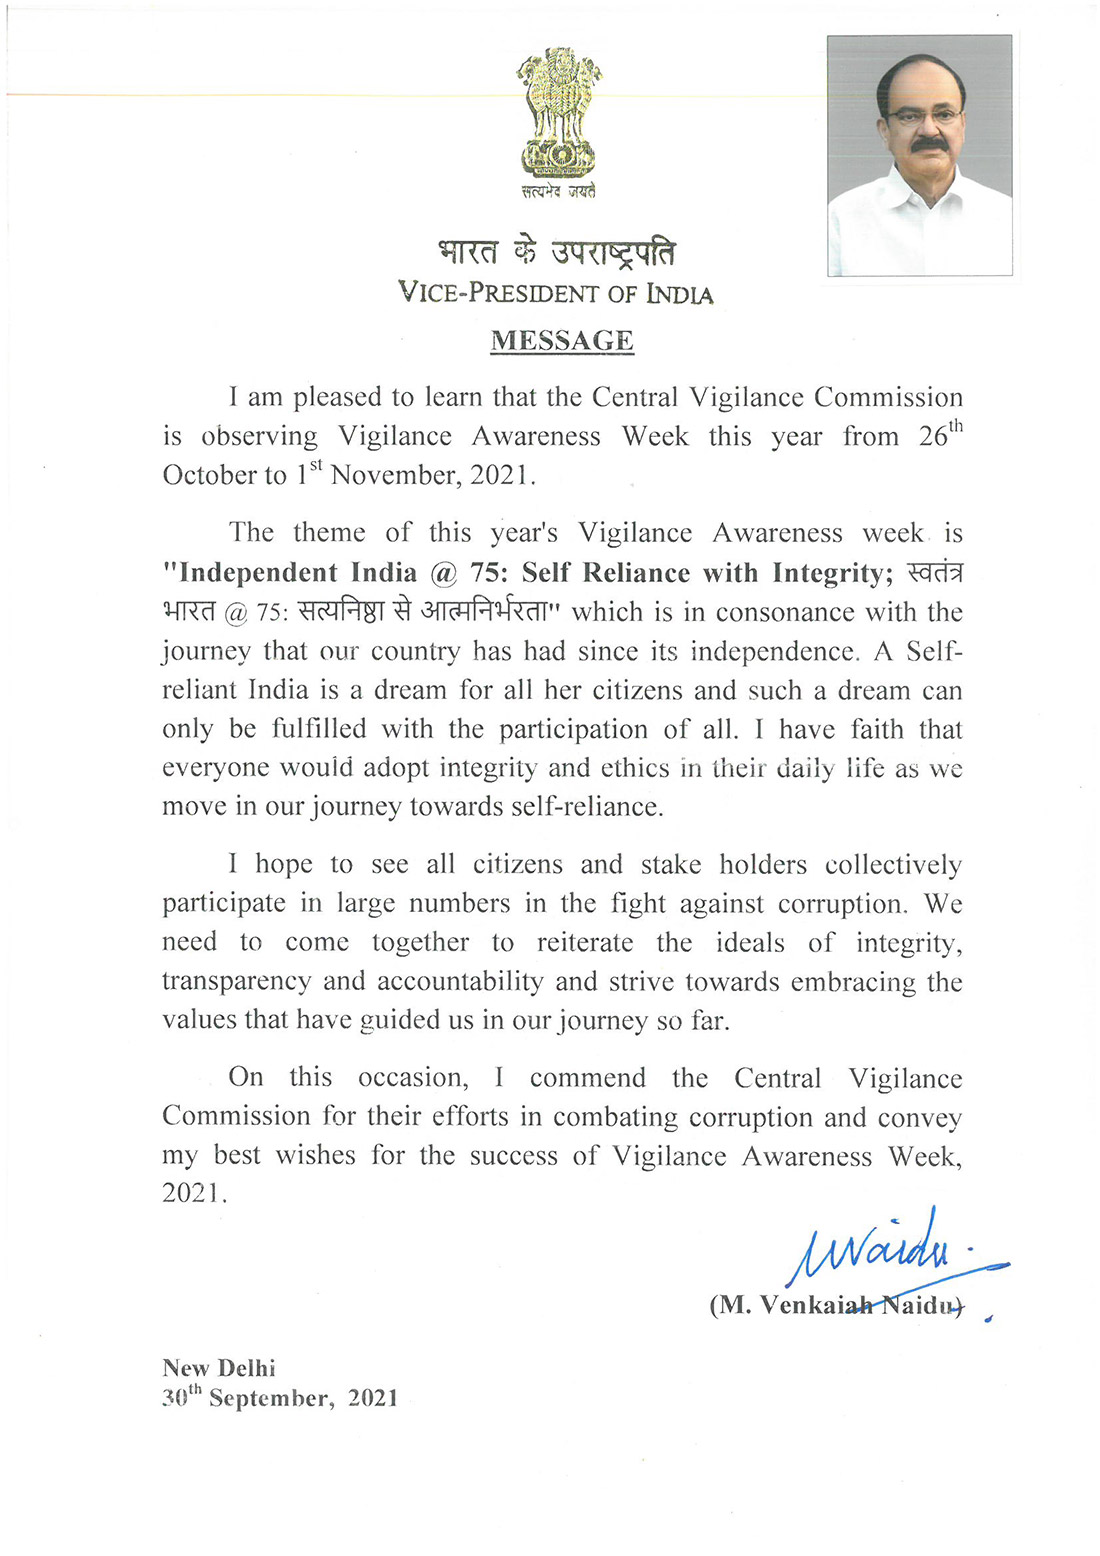 Message from Vice-President of India